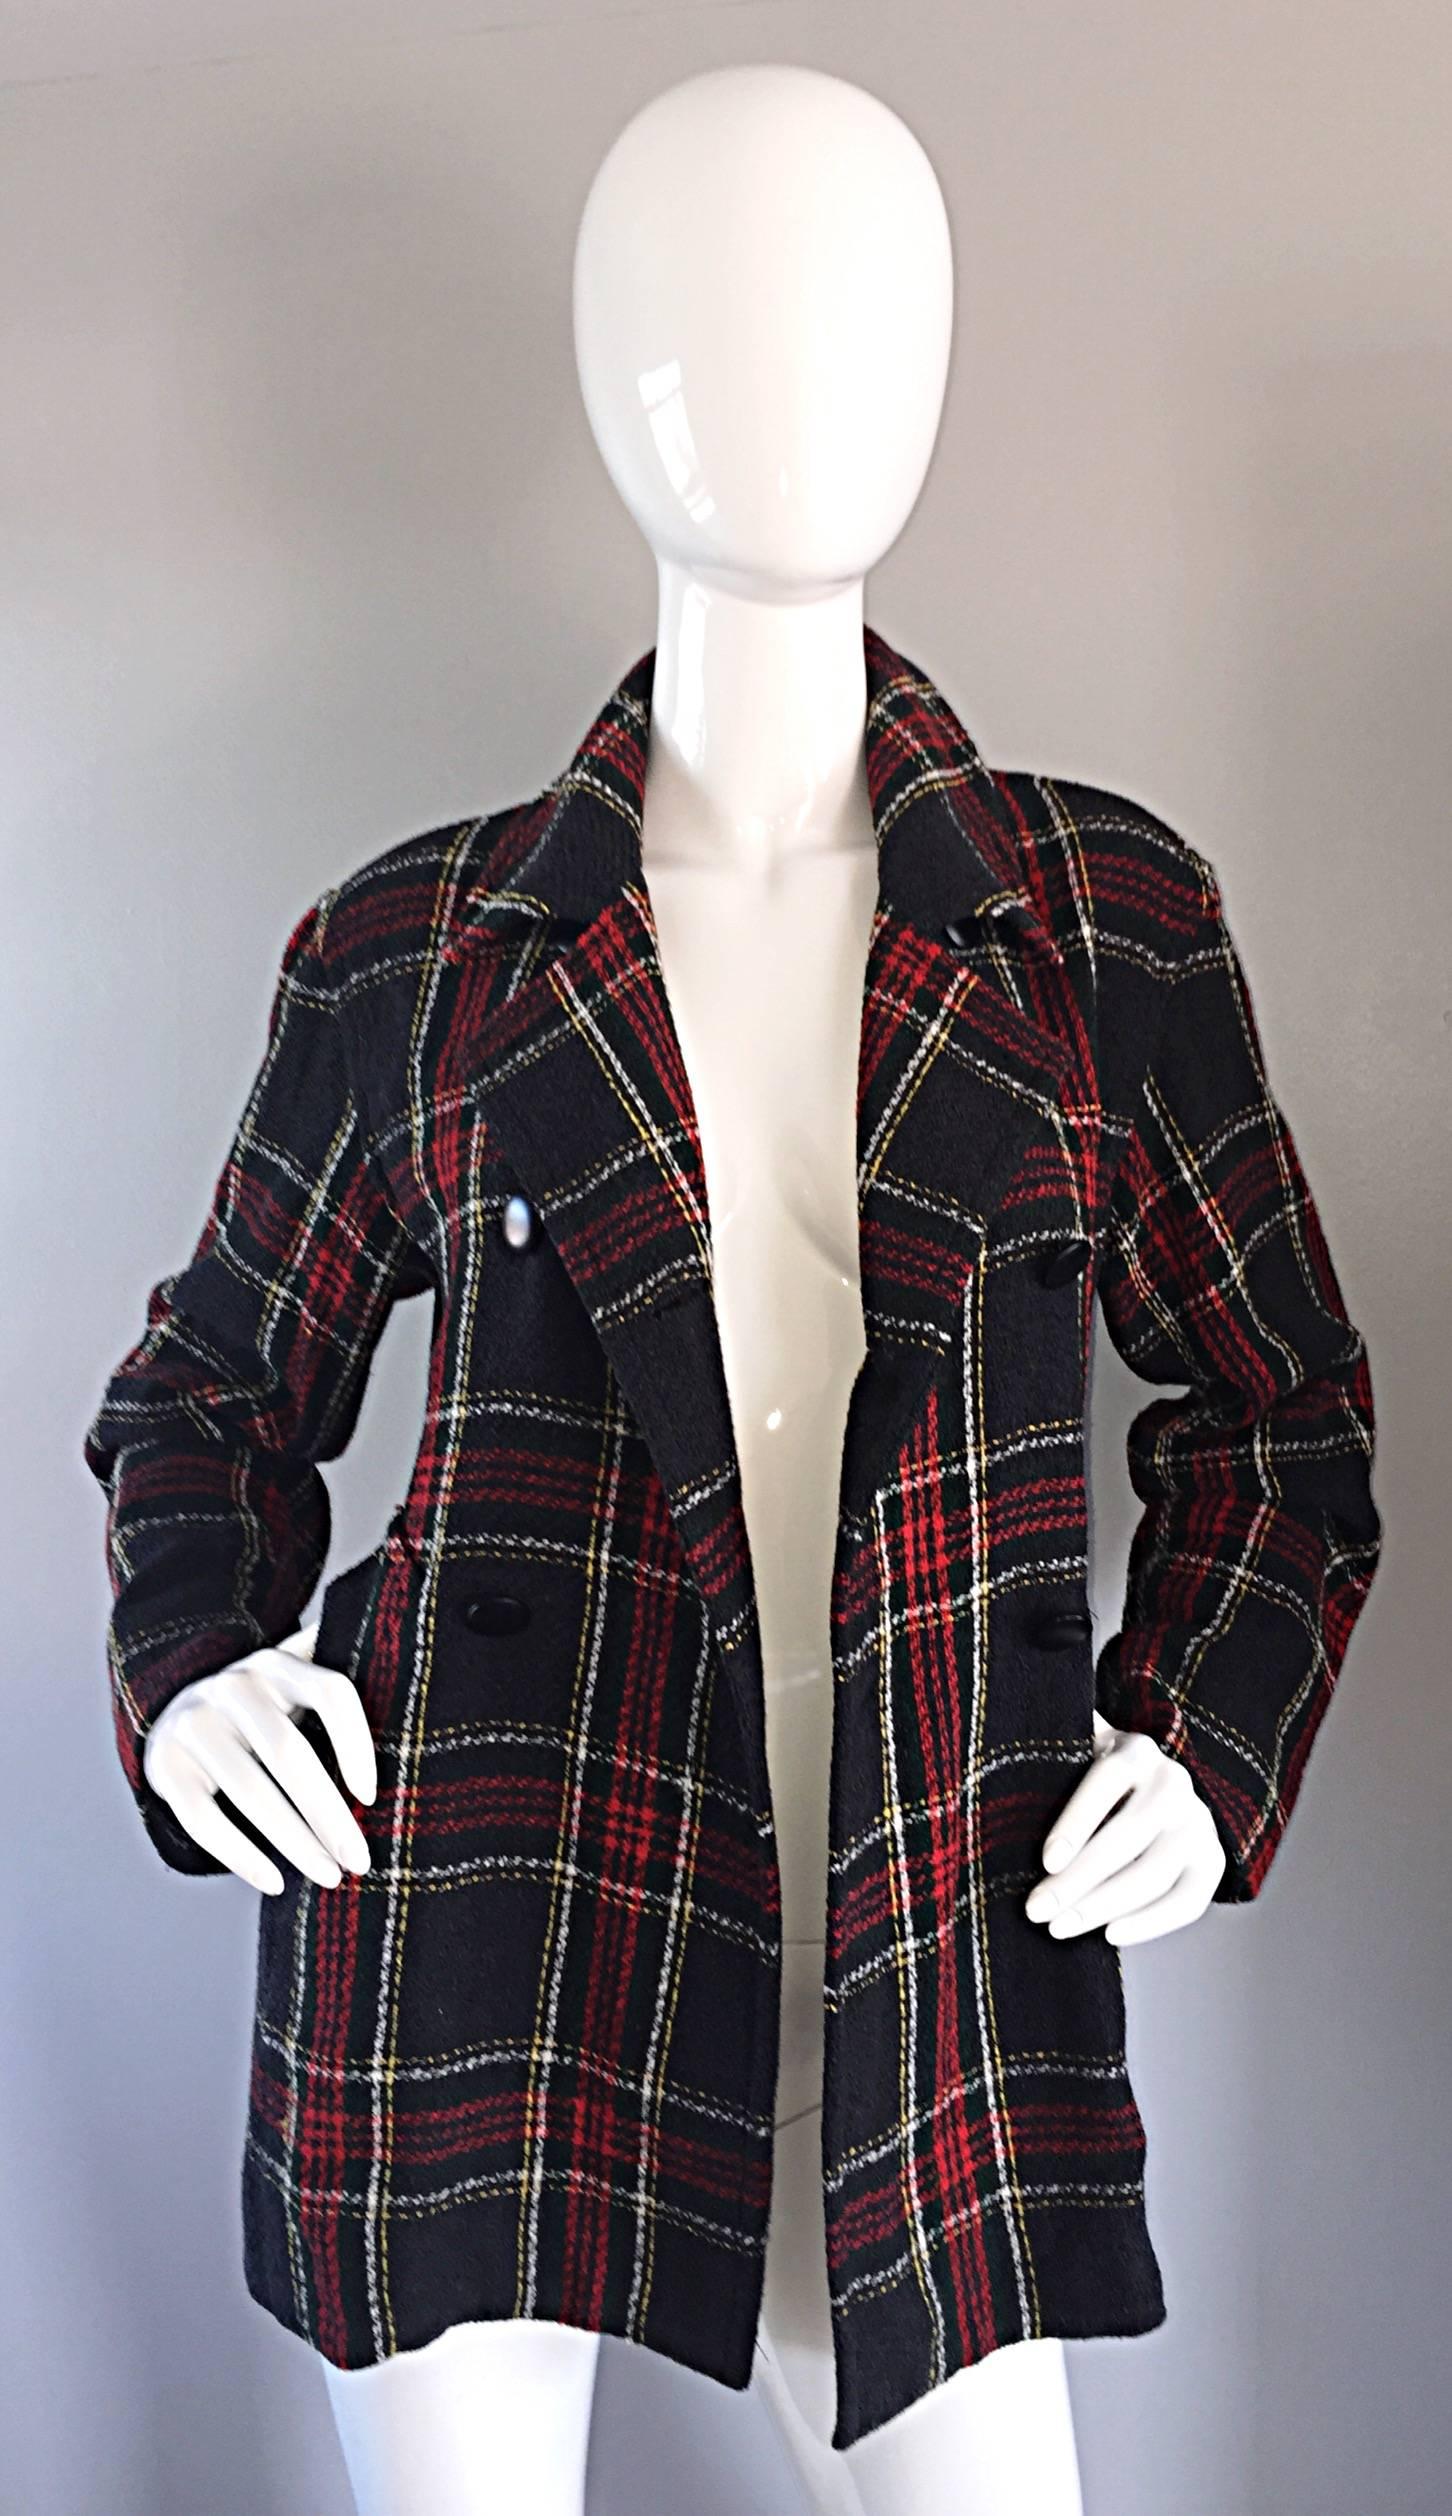 Chic vintage Isaac Mizrahi for Bergdorf Goodman tartan plaid swing jacket! Classic style, with colors of red, dark greens, and white. Double breasted style, with self belt in the back. Pockets at both sides of the waist. Great flattering fit! Looks